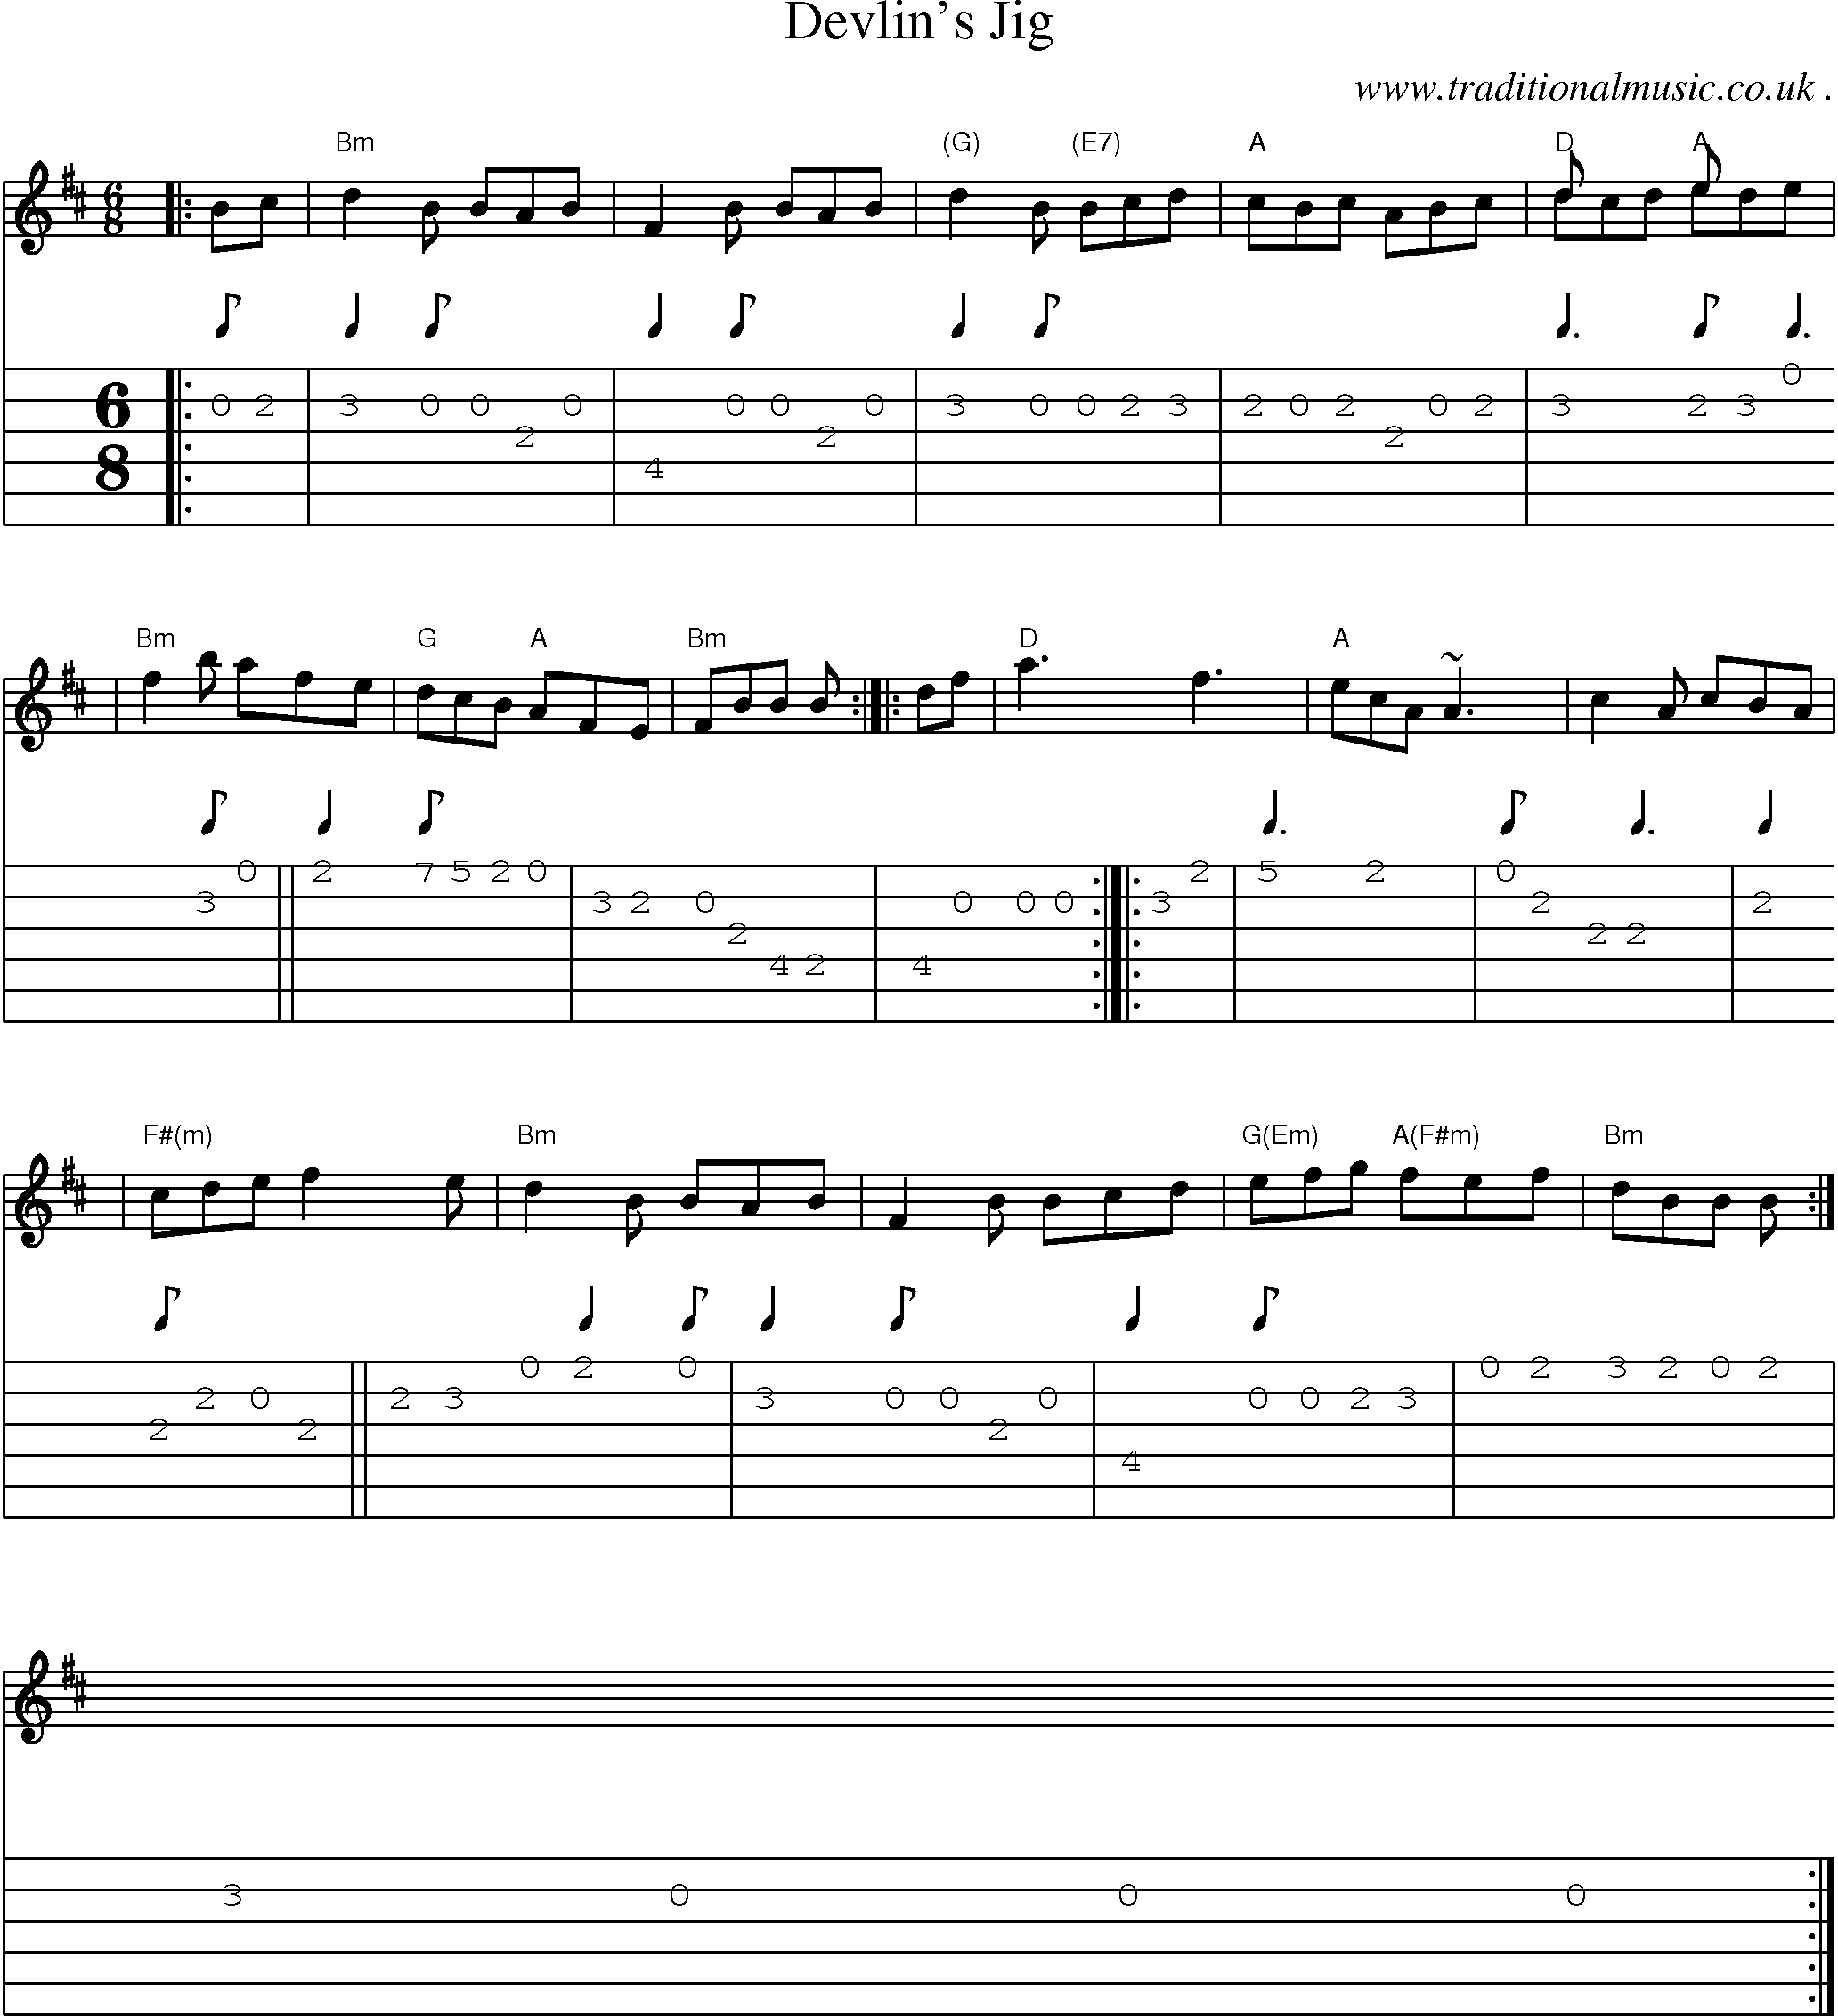 Sheet-music  score, Chords and Guitar Tabs for Devlins Jig